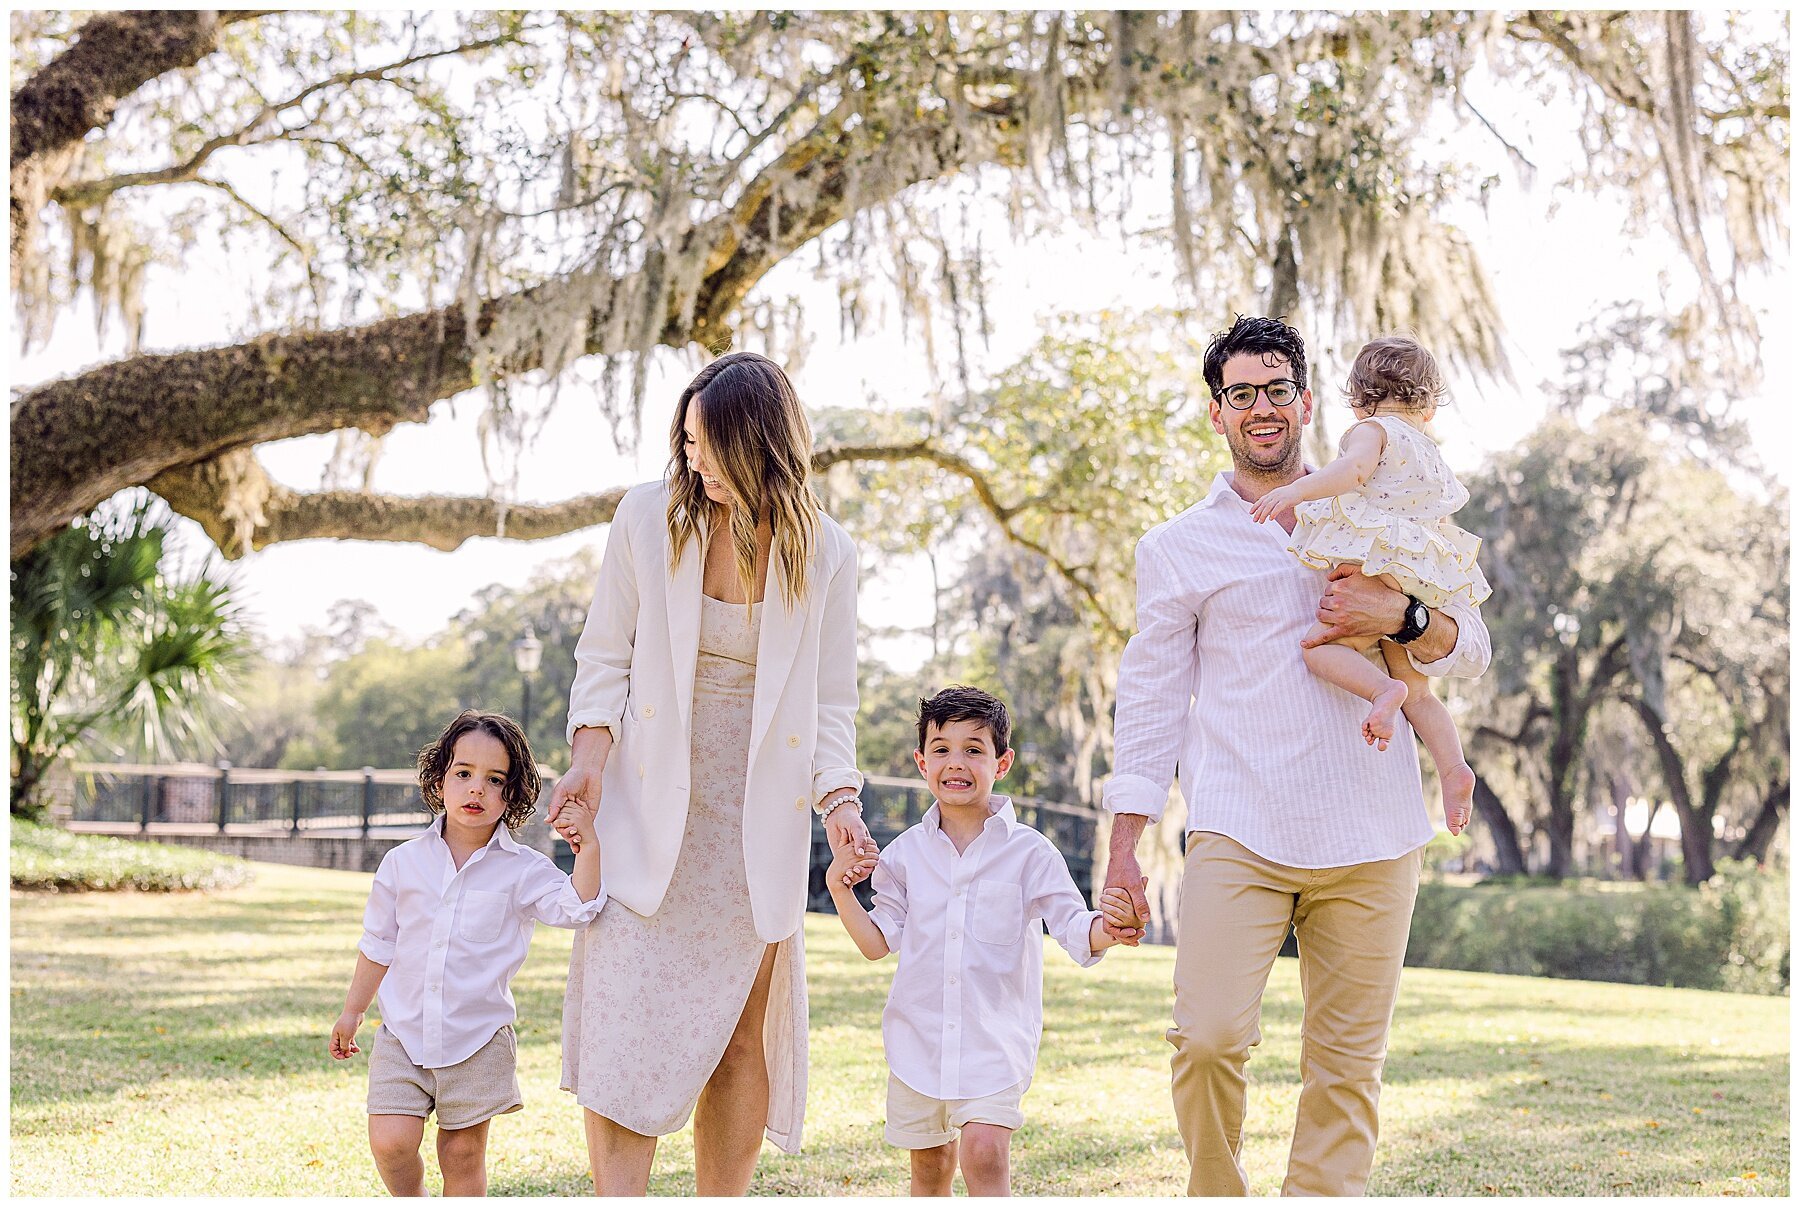 Katherine_Ives_Photography_Sallah_Palmetto_Bluff_Family_Session_14.JPG